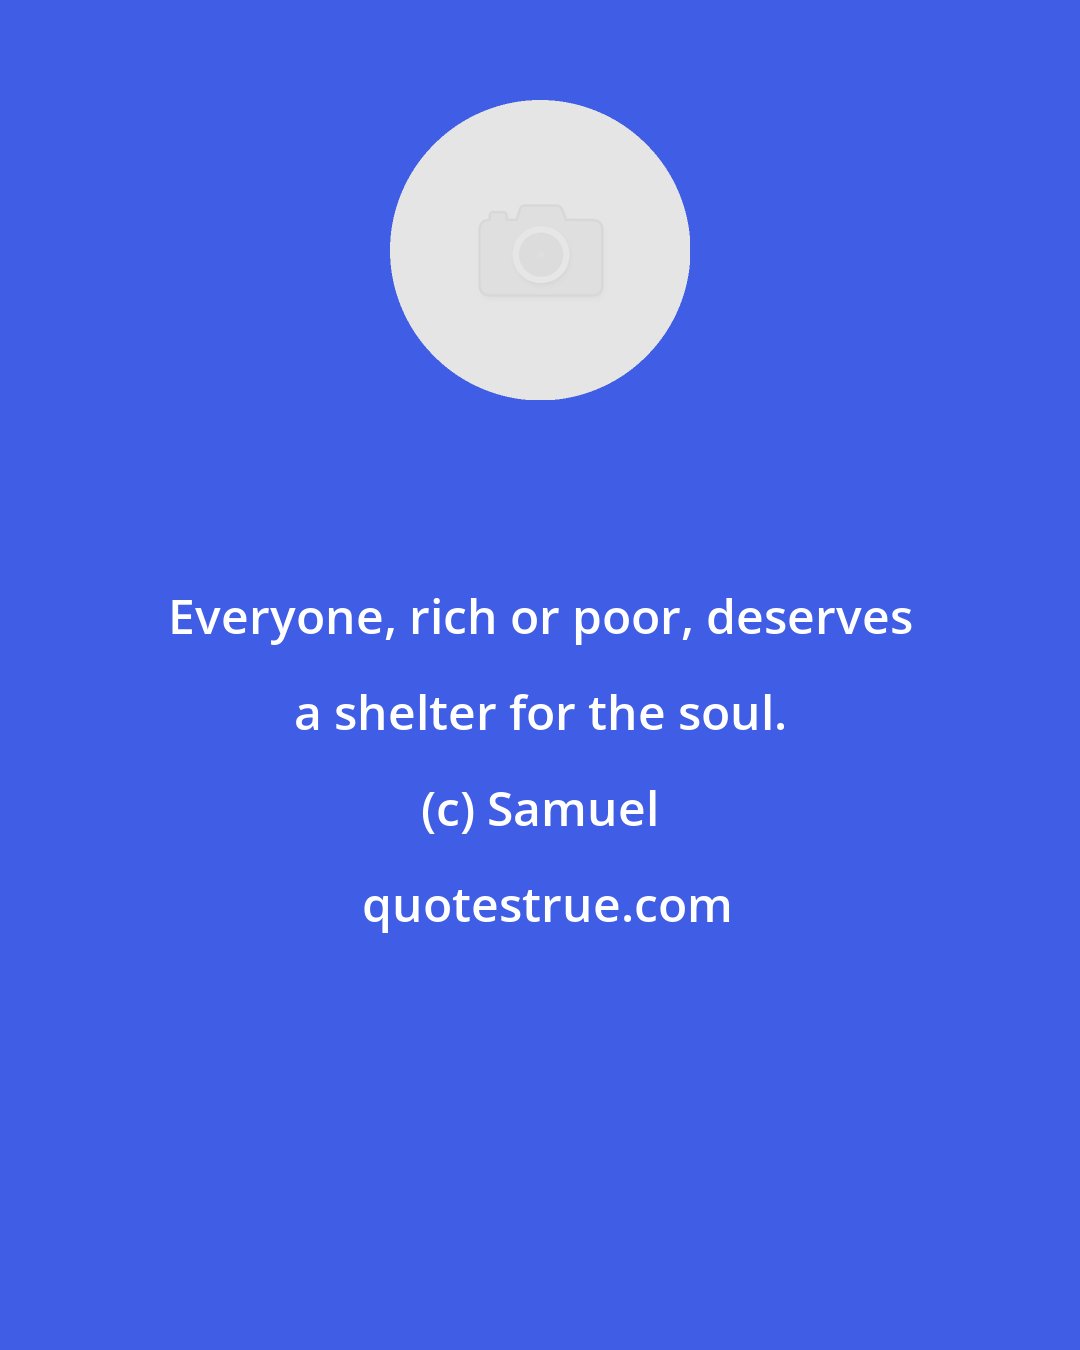 Samuel: Everyone, rich or poor, deserves a shelter for the soul.